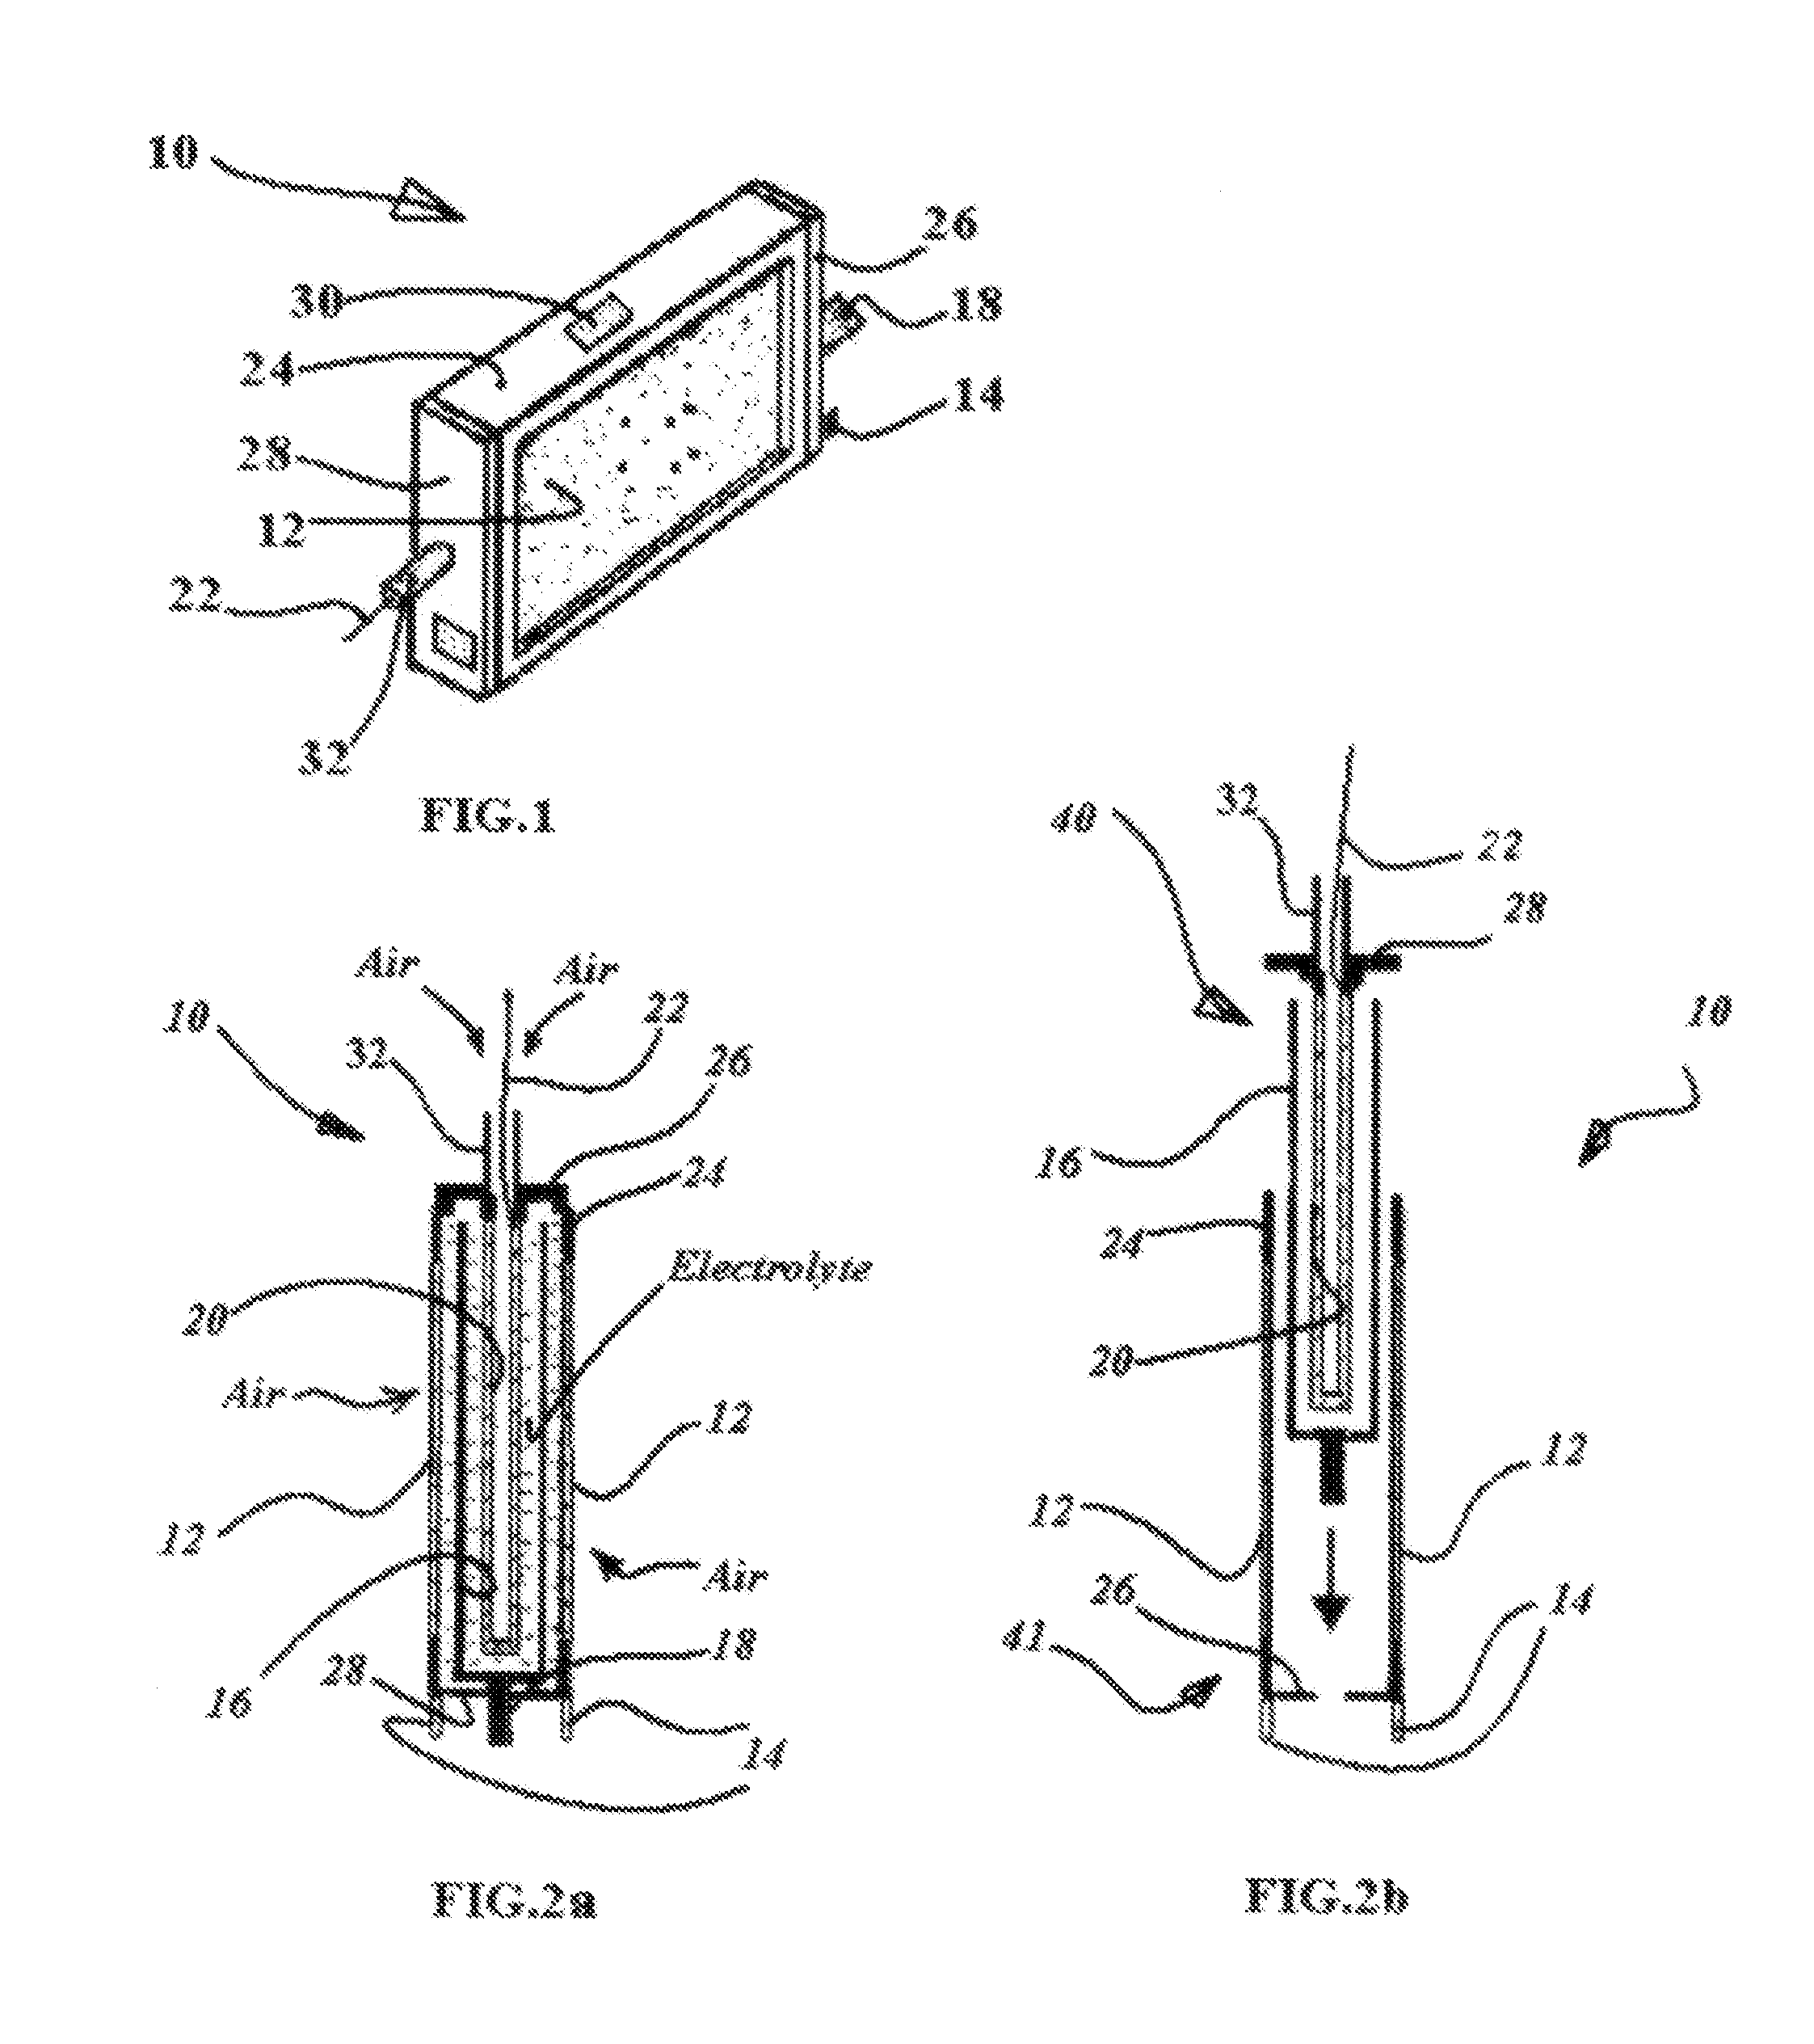 Electrochemical Air Breathing Voltage Supply and Power Source Having in-situ Neutral-pH Electrolyte